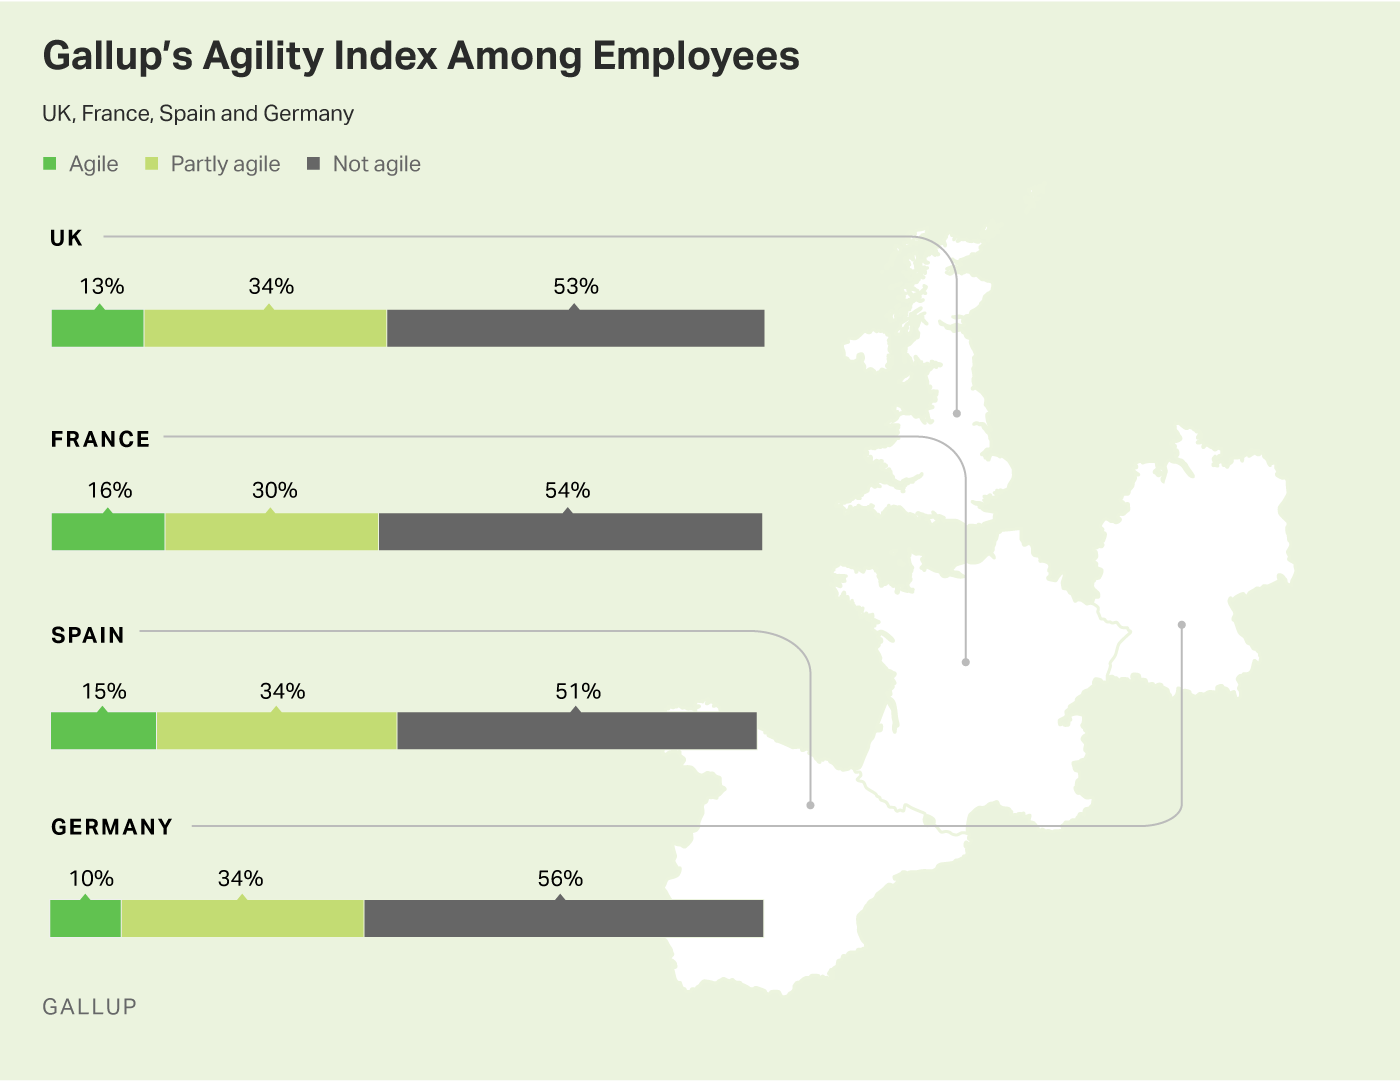 Graphic: Gallup's Agility INdex Among Employees in the UK, France, Spain, and GErmany.